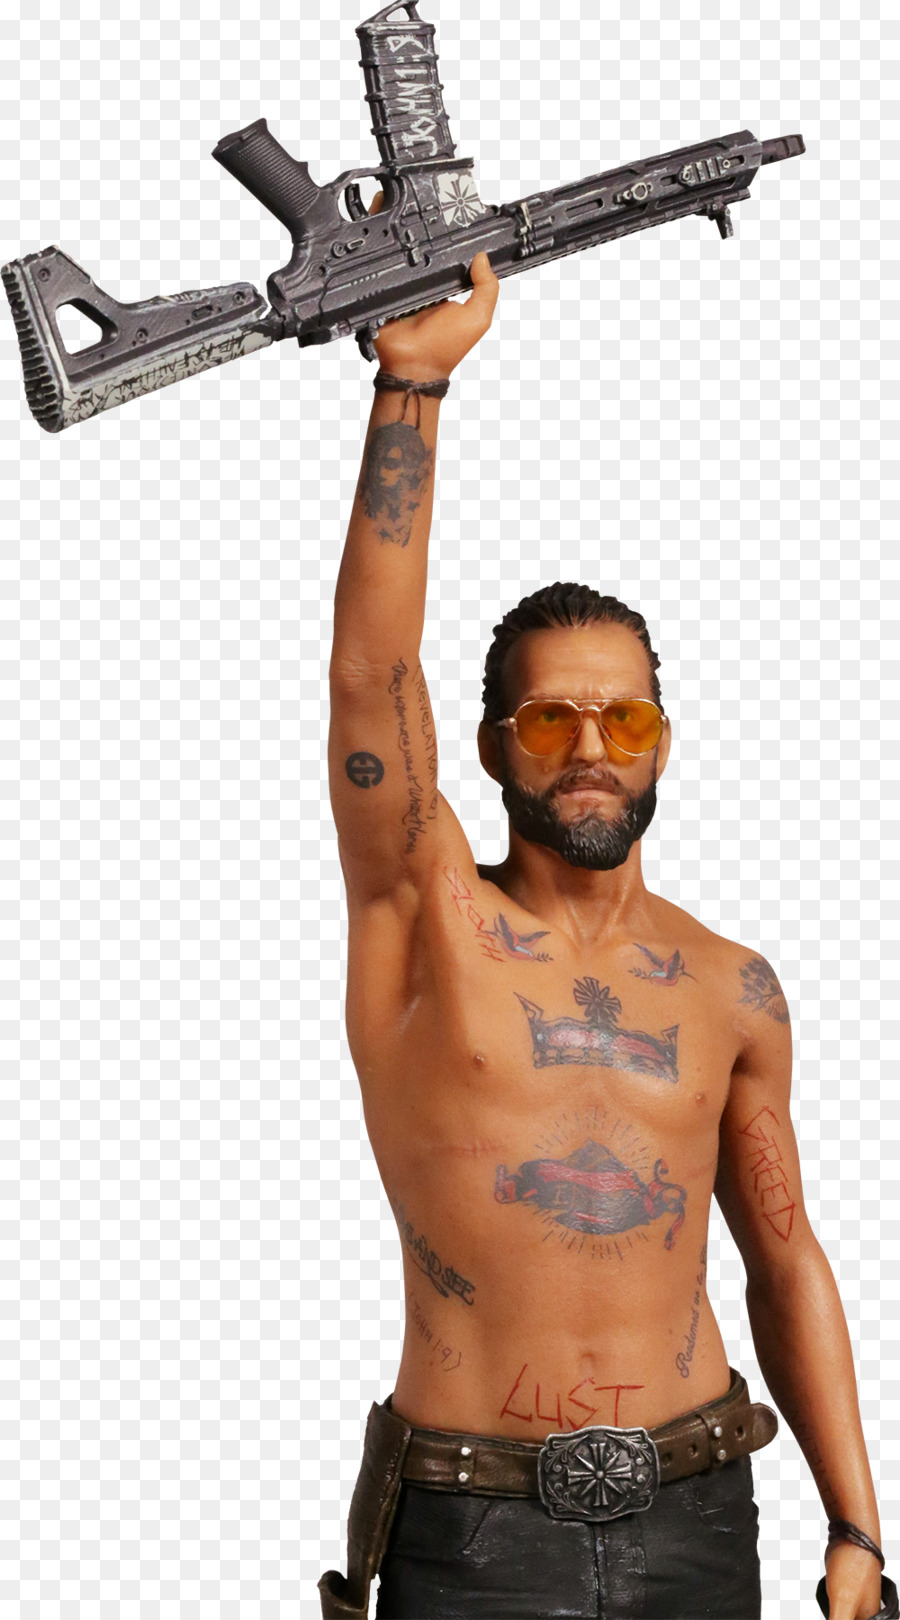 Far Cry PNG - 172496